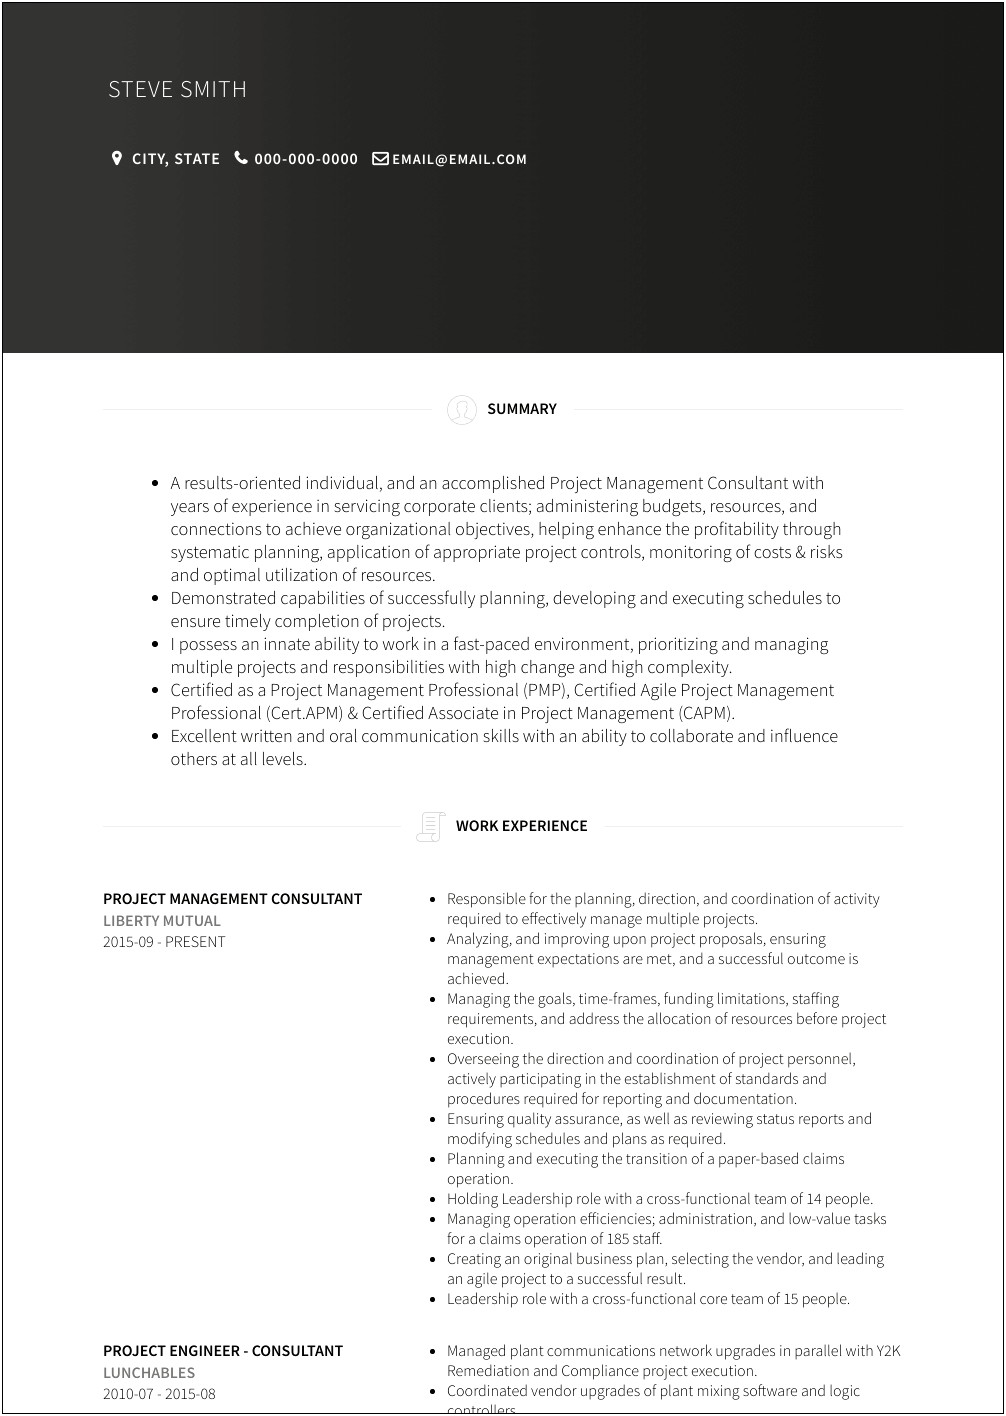 Resume Objectve For A Job At Liberty Mutual